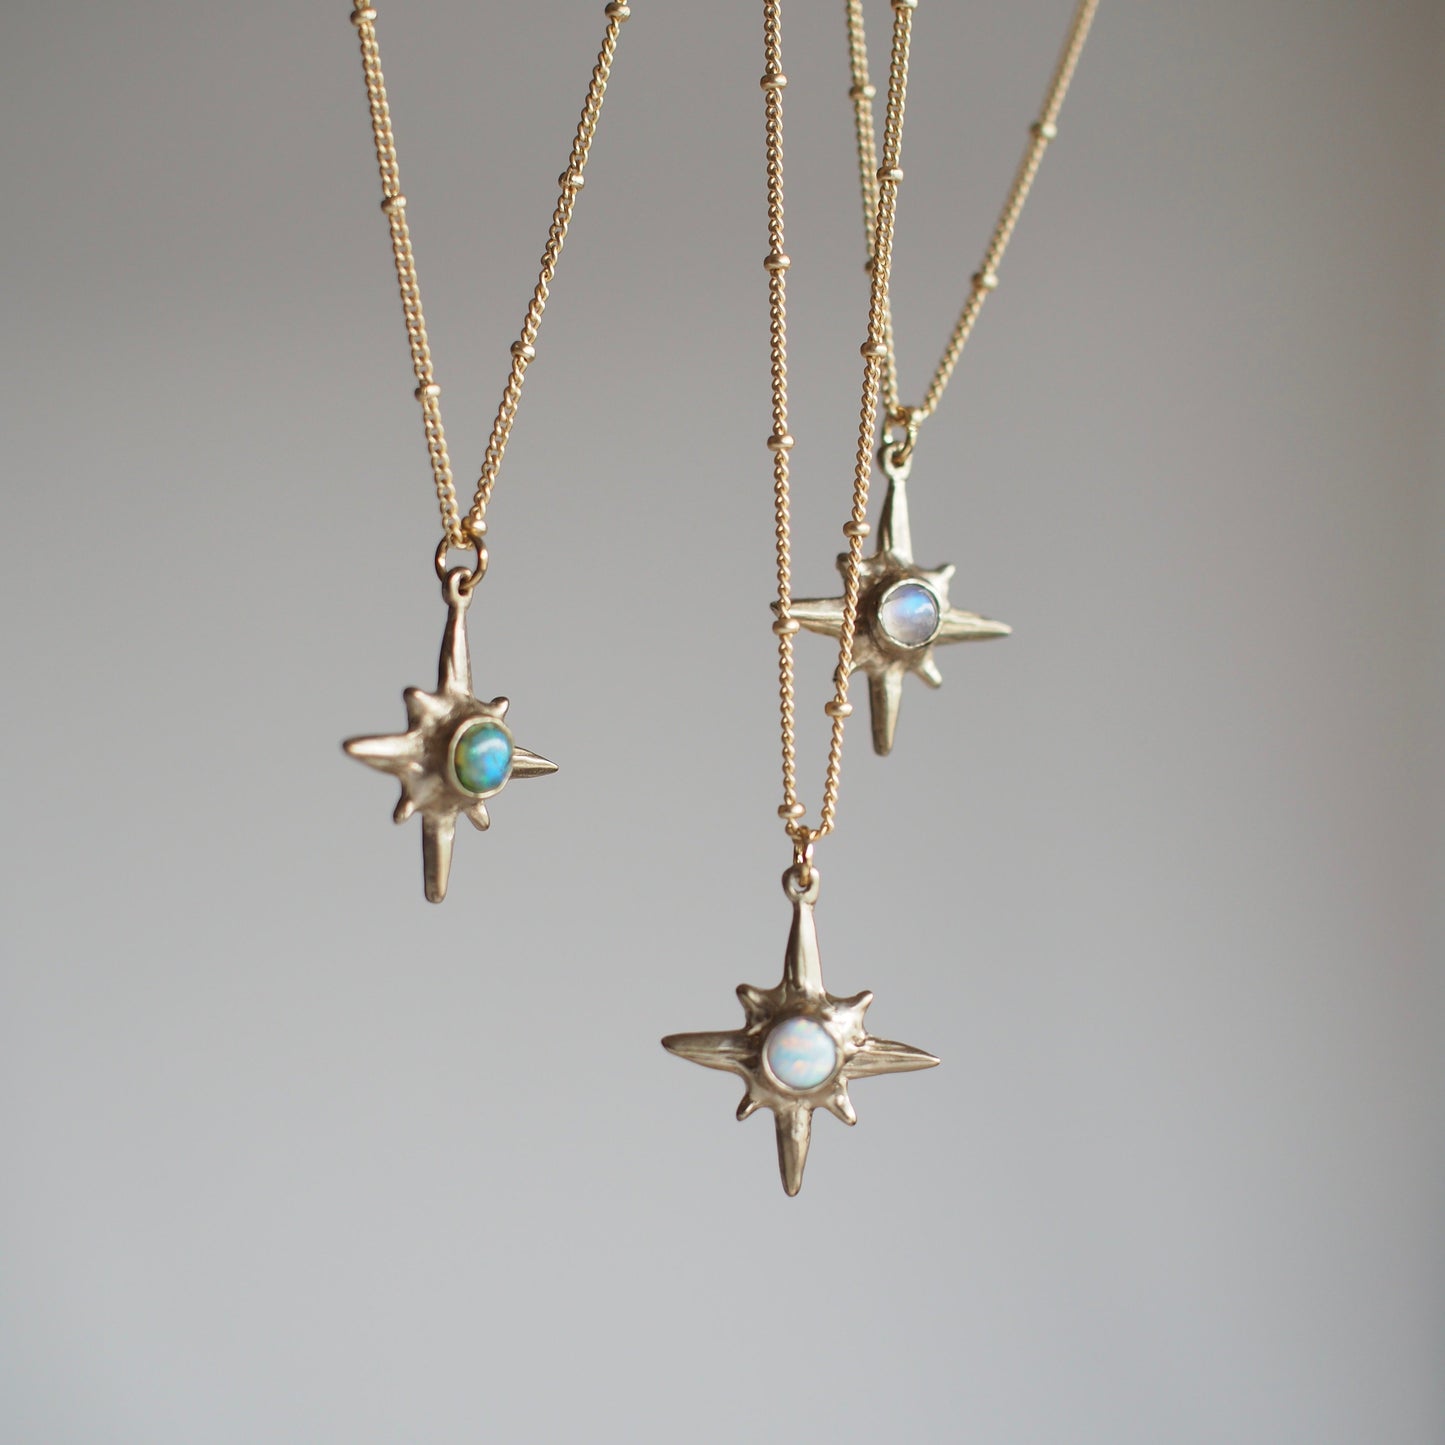 Hanging Shiny Gold Iron Oxide North Star Polaris Necklaces